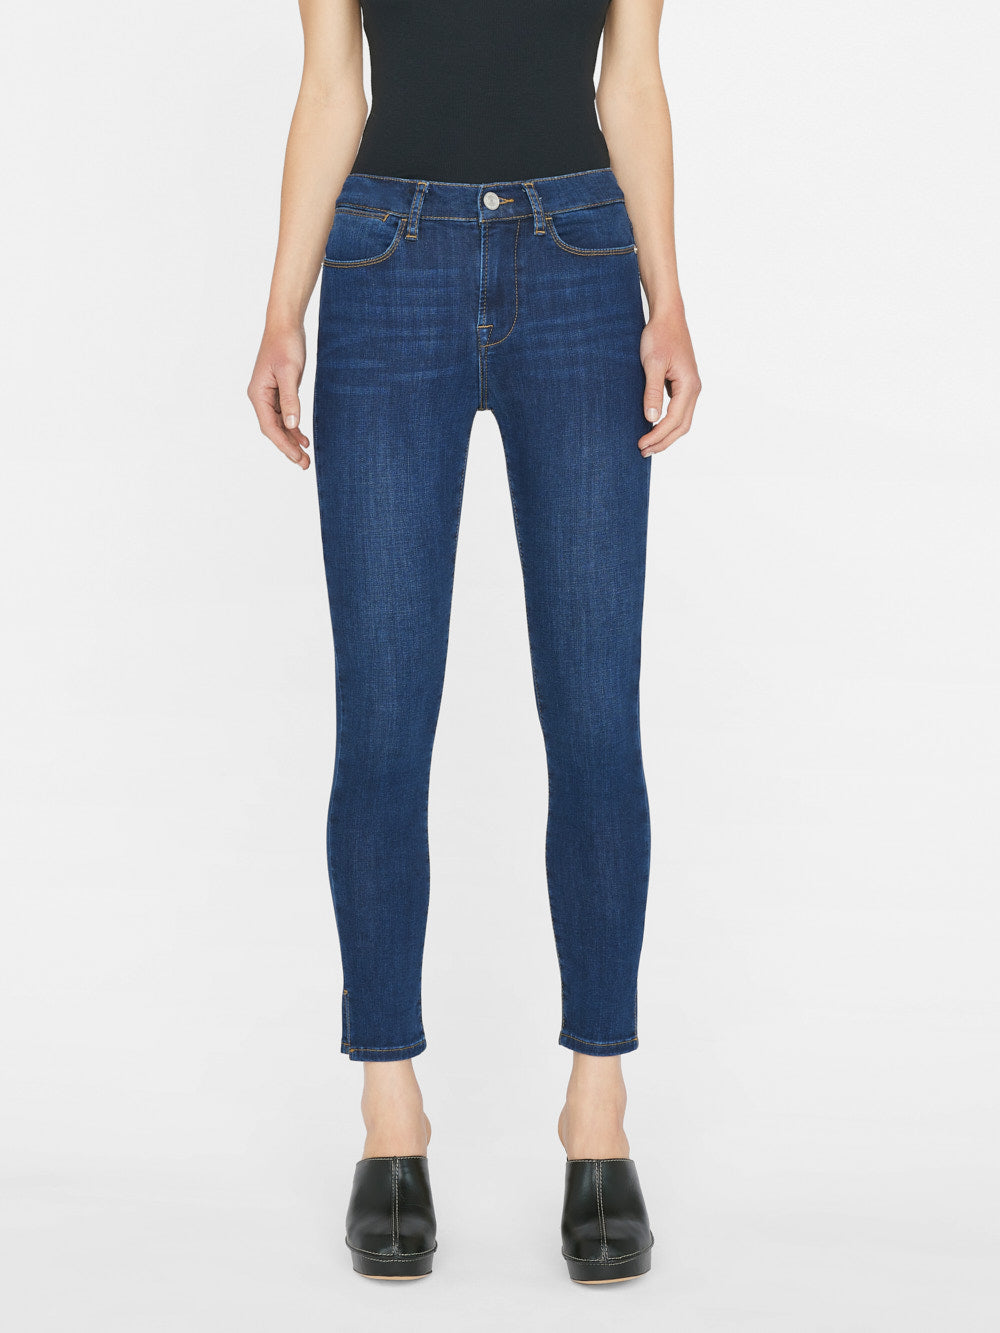 The woman showcases her Frame Le High Skinny Outseam Slit - Majesty jean, a form-fitting silhouette crafted from a sustainable stretch cotton blend.